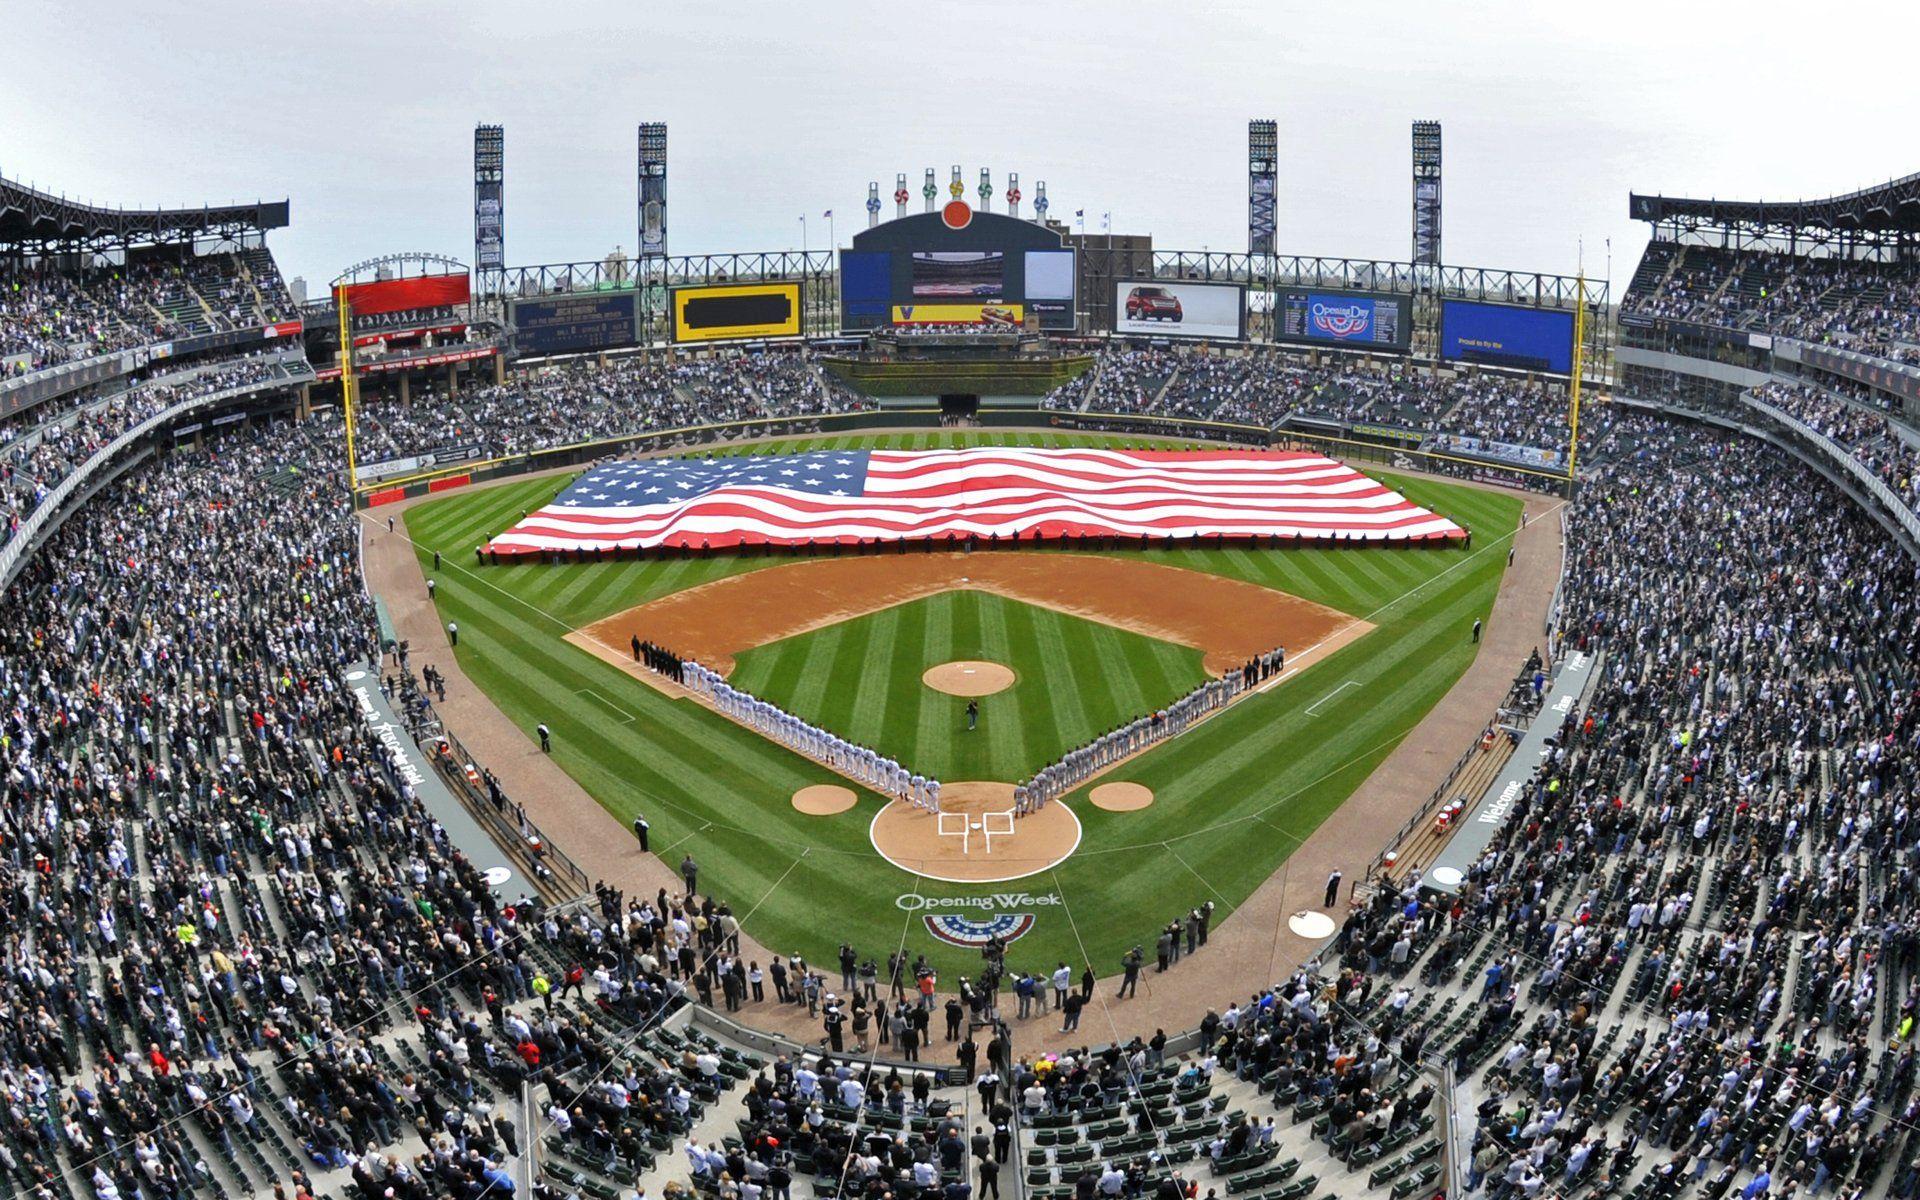 White Sox vs Red Sox Tickets, Aug 30 in Chicago